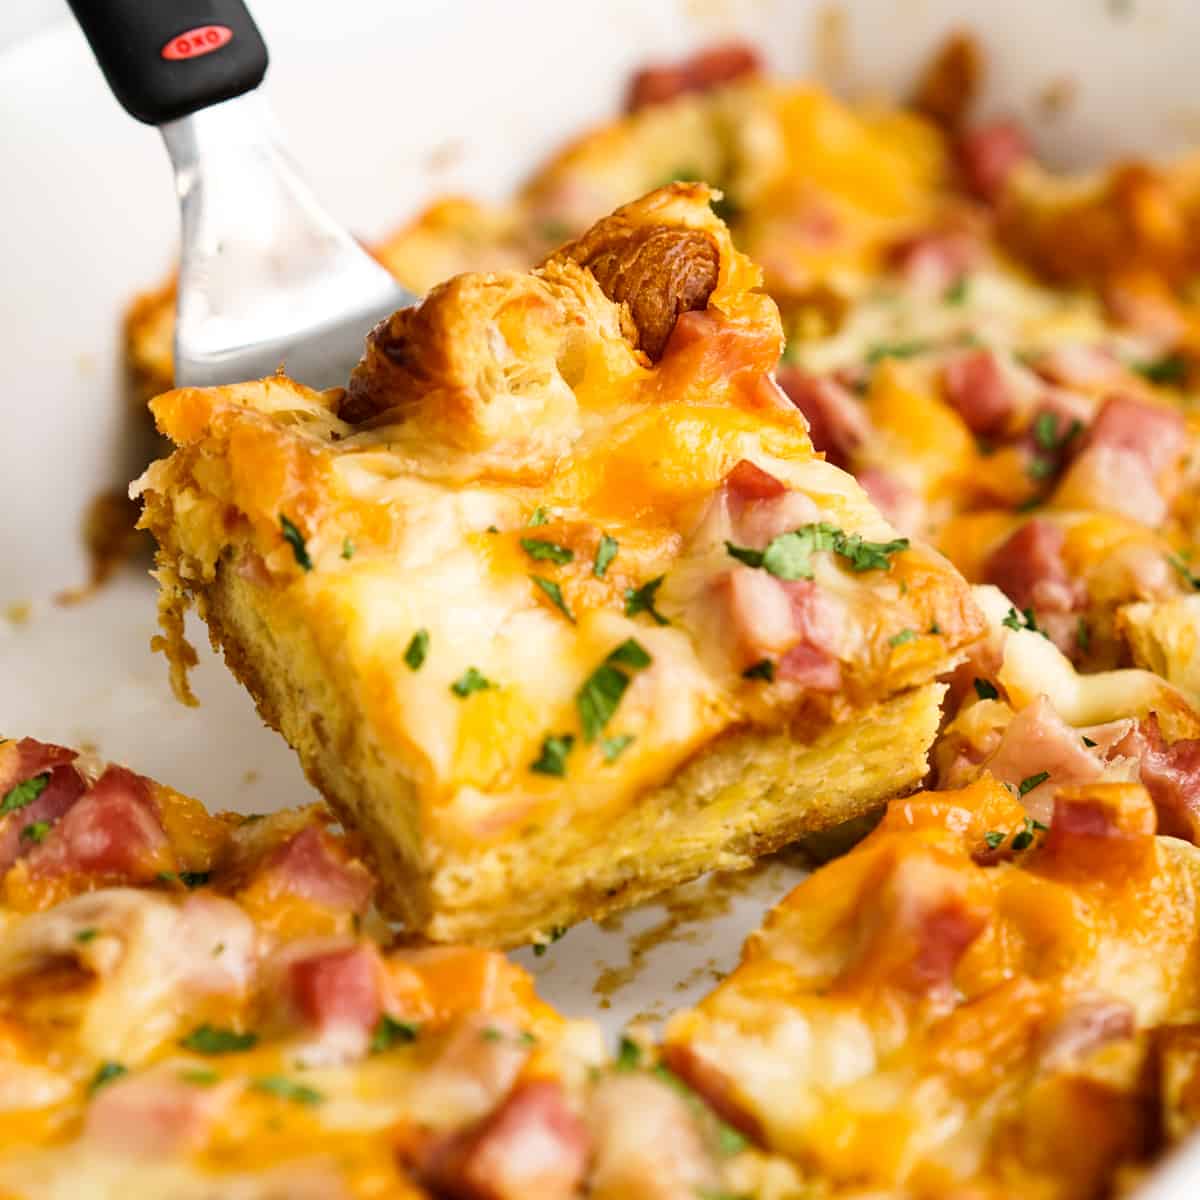 Ham and Cheese Croissant Casserole